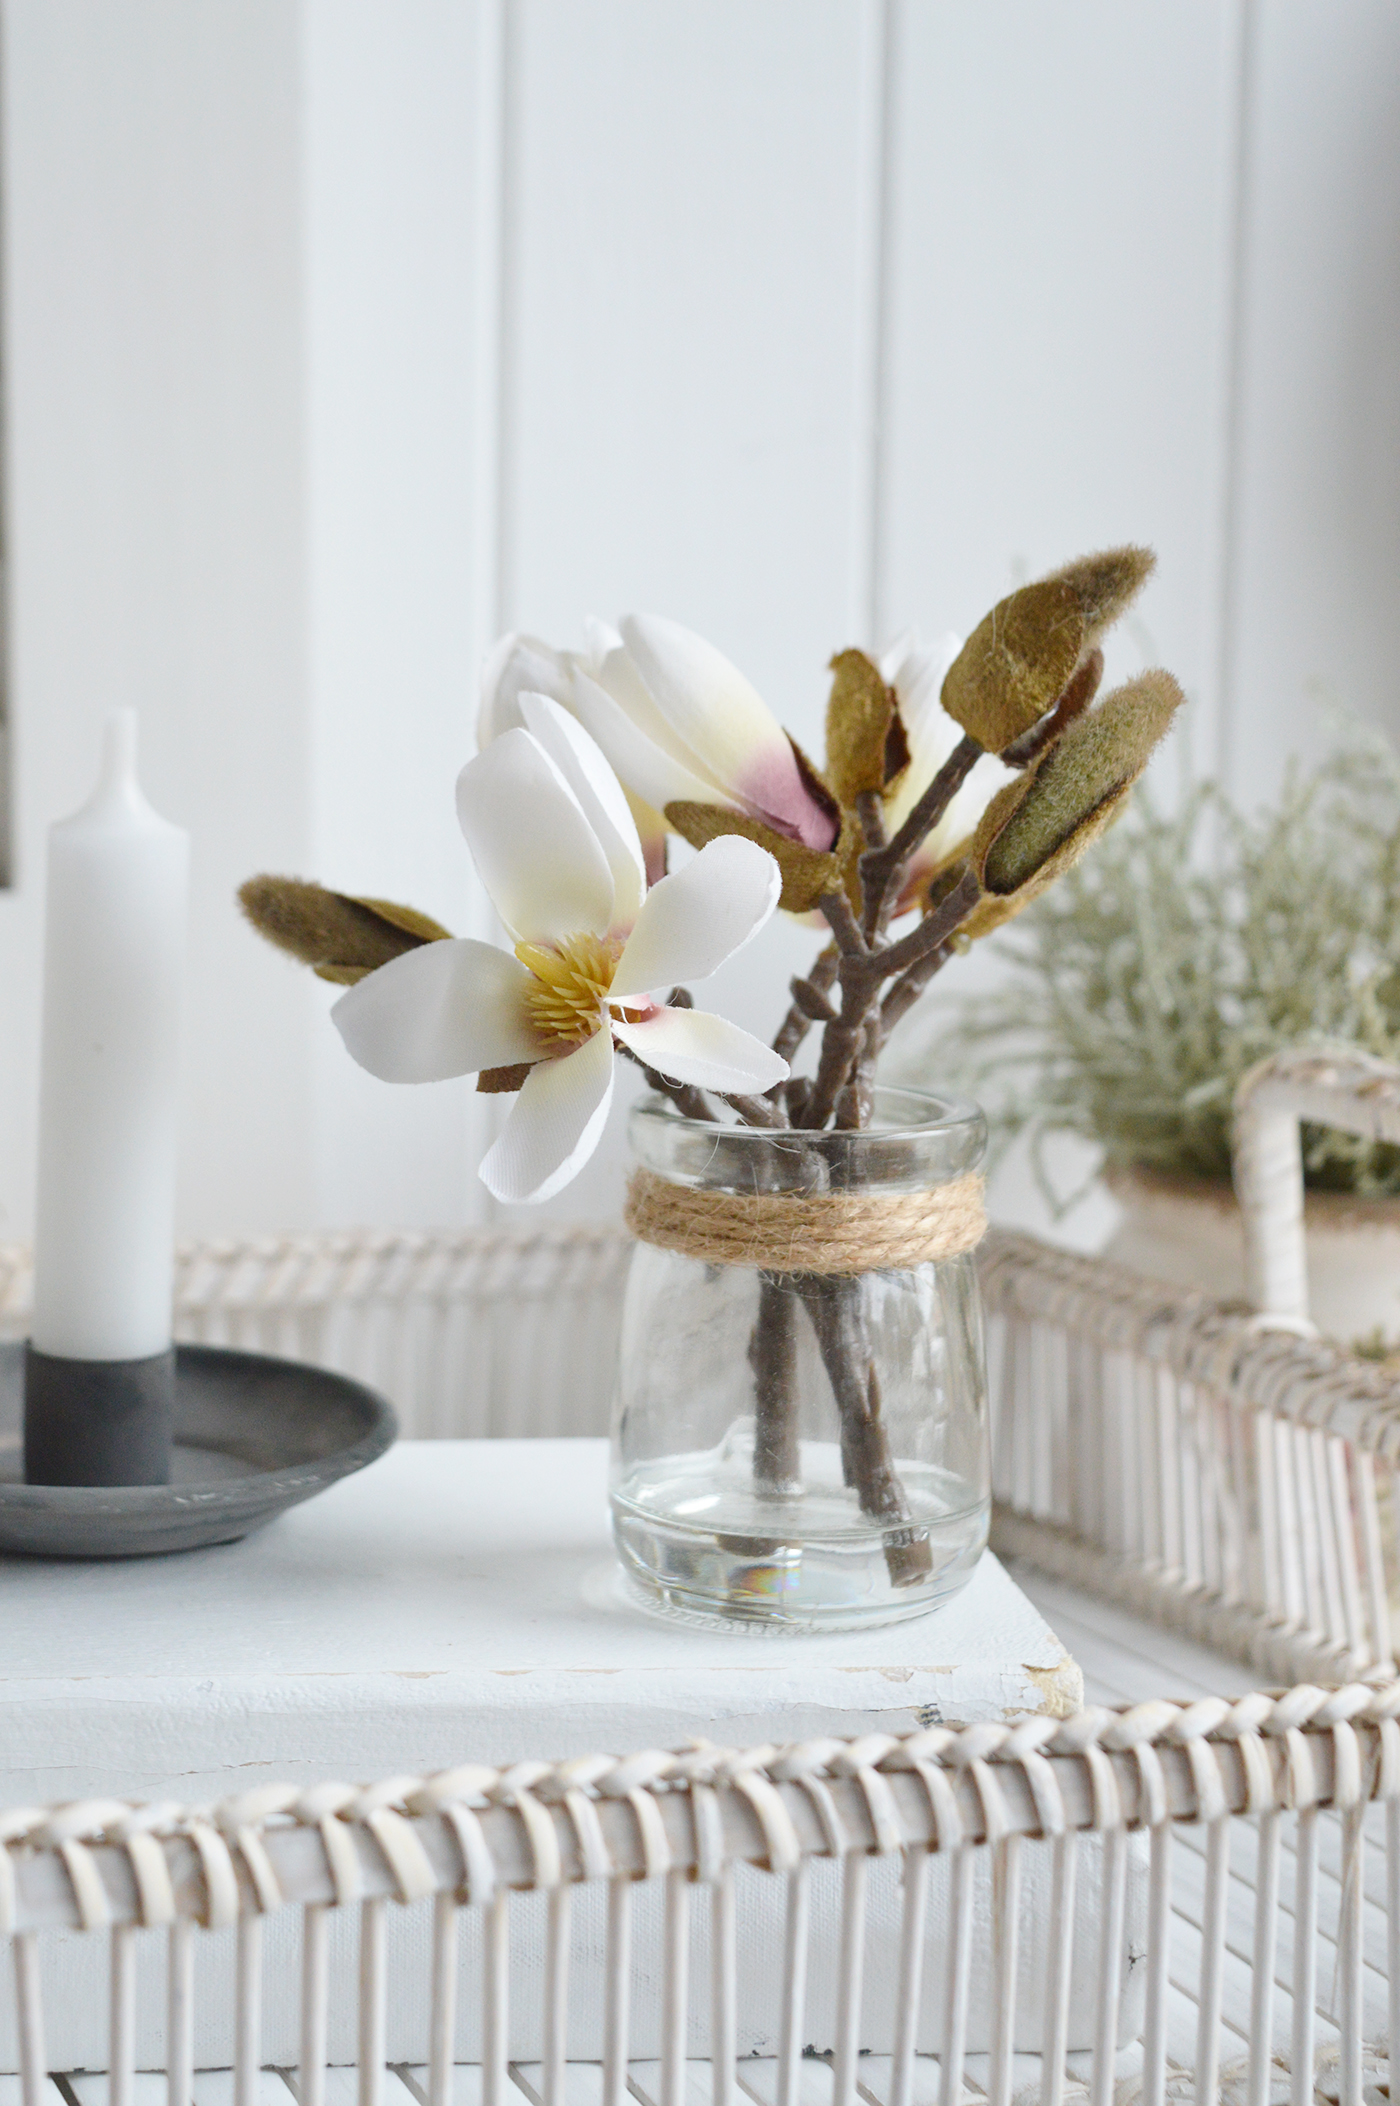 Faux Magnolia Sprig in Pot - Styling New England Country, modern Farmhouswe and Coastal Homes and Interiors